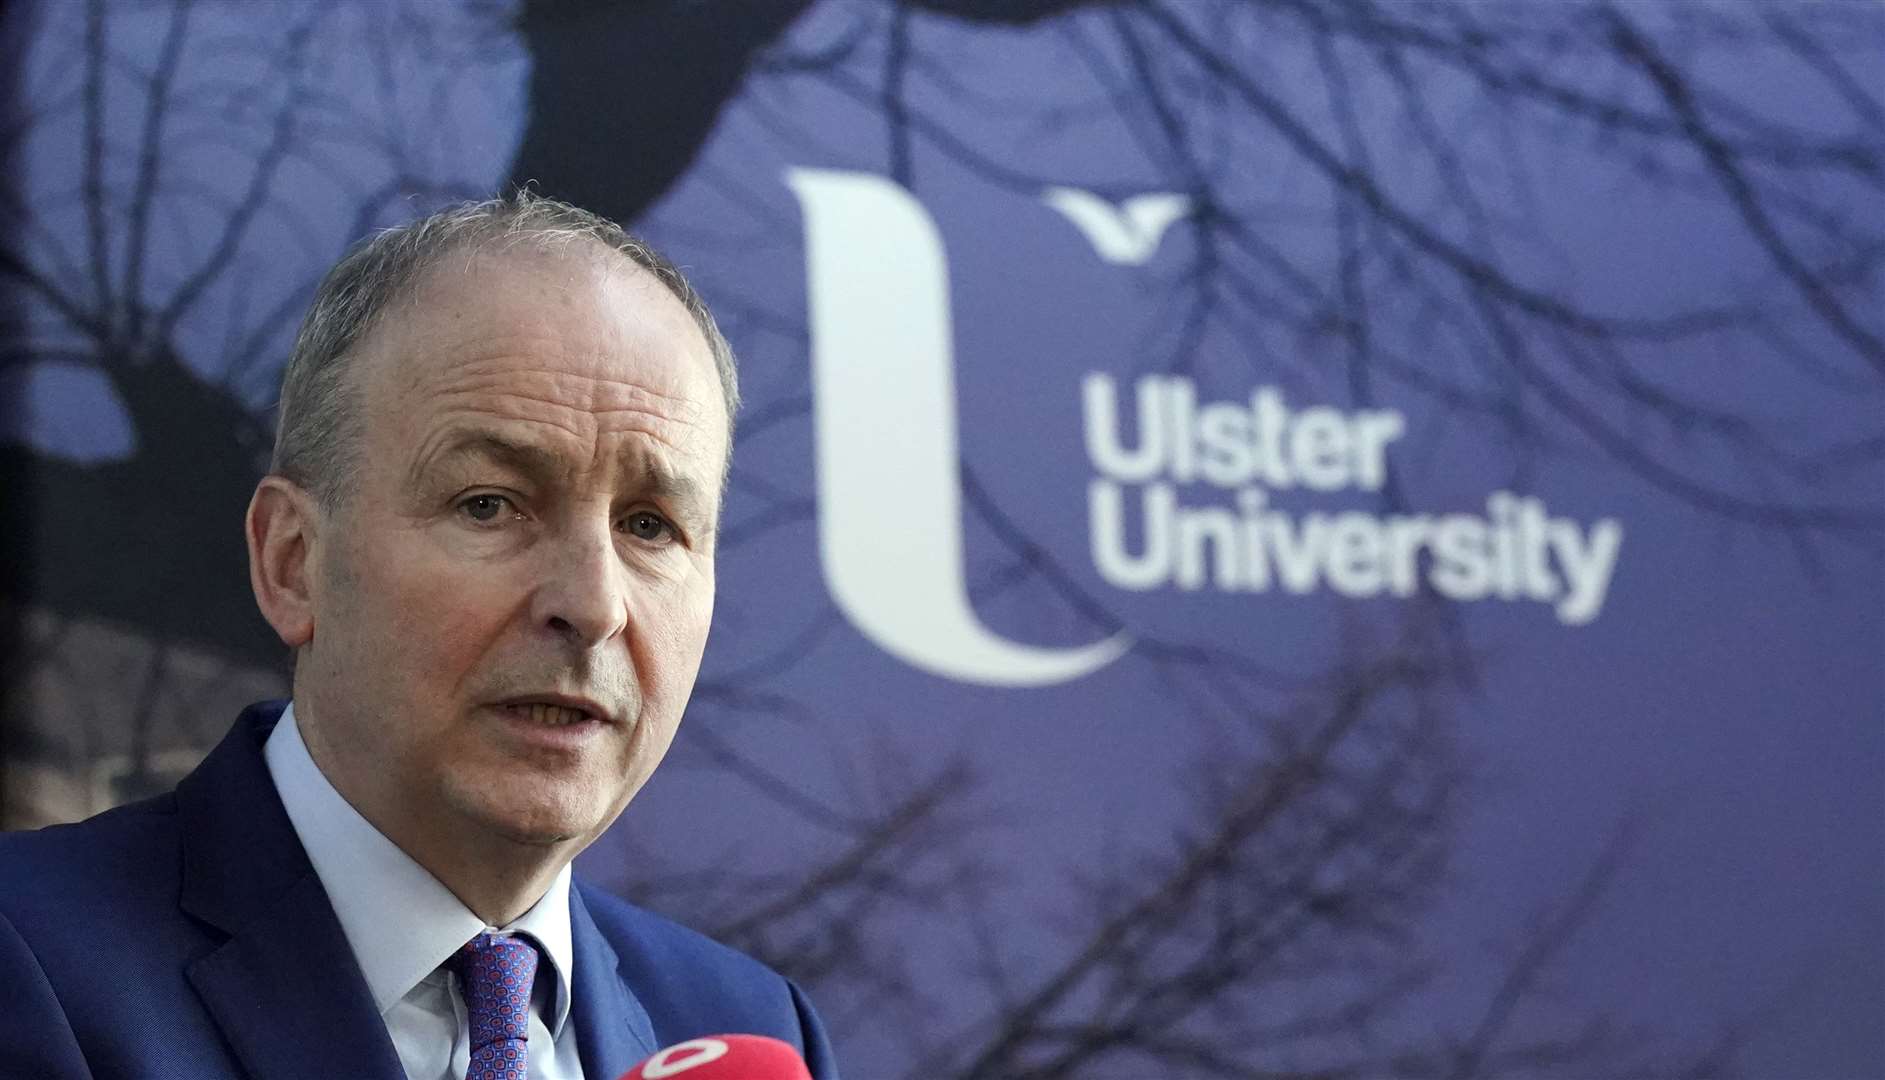 Tanaiste Micheal Martin during a visit to Ulster University in Belfast (Niall Carson/PA)